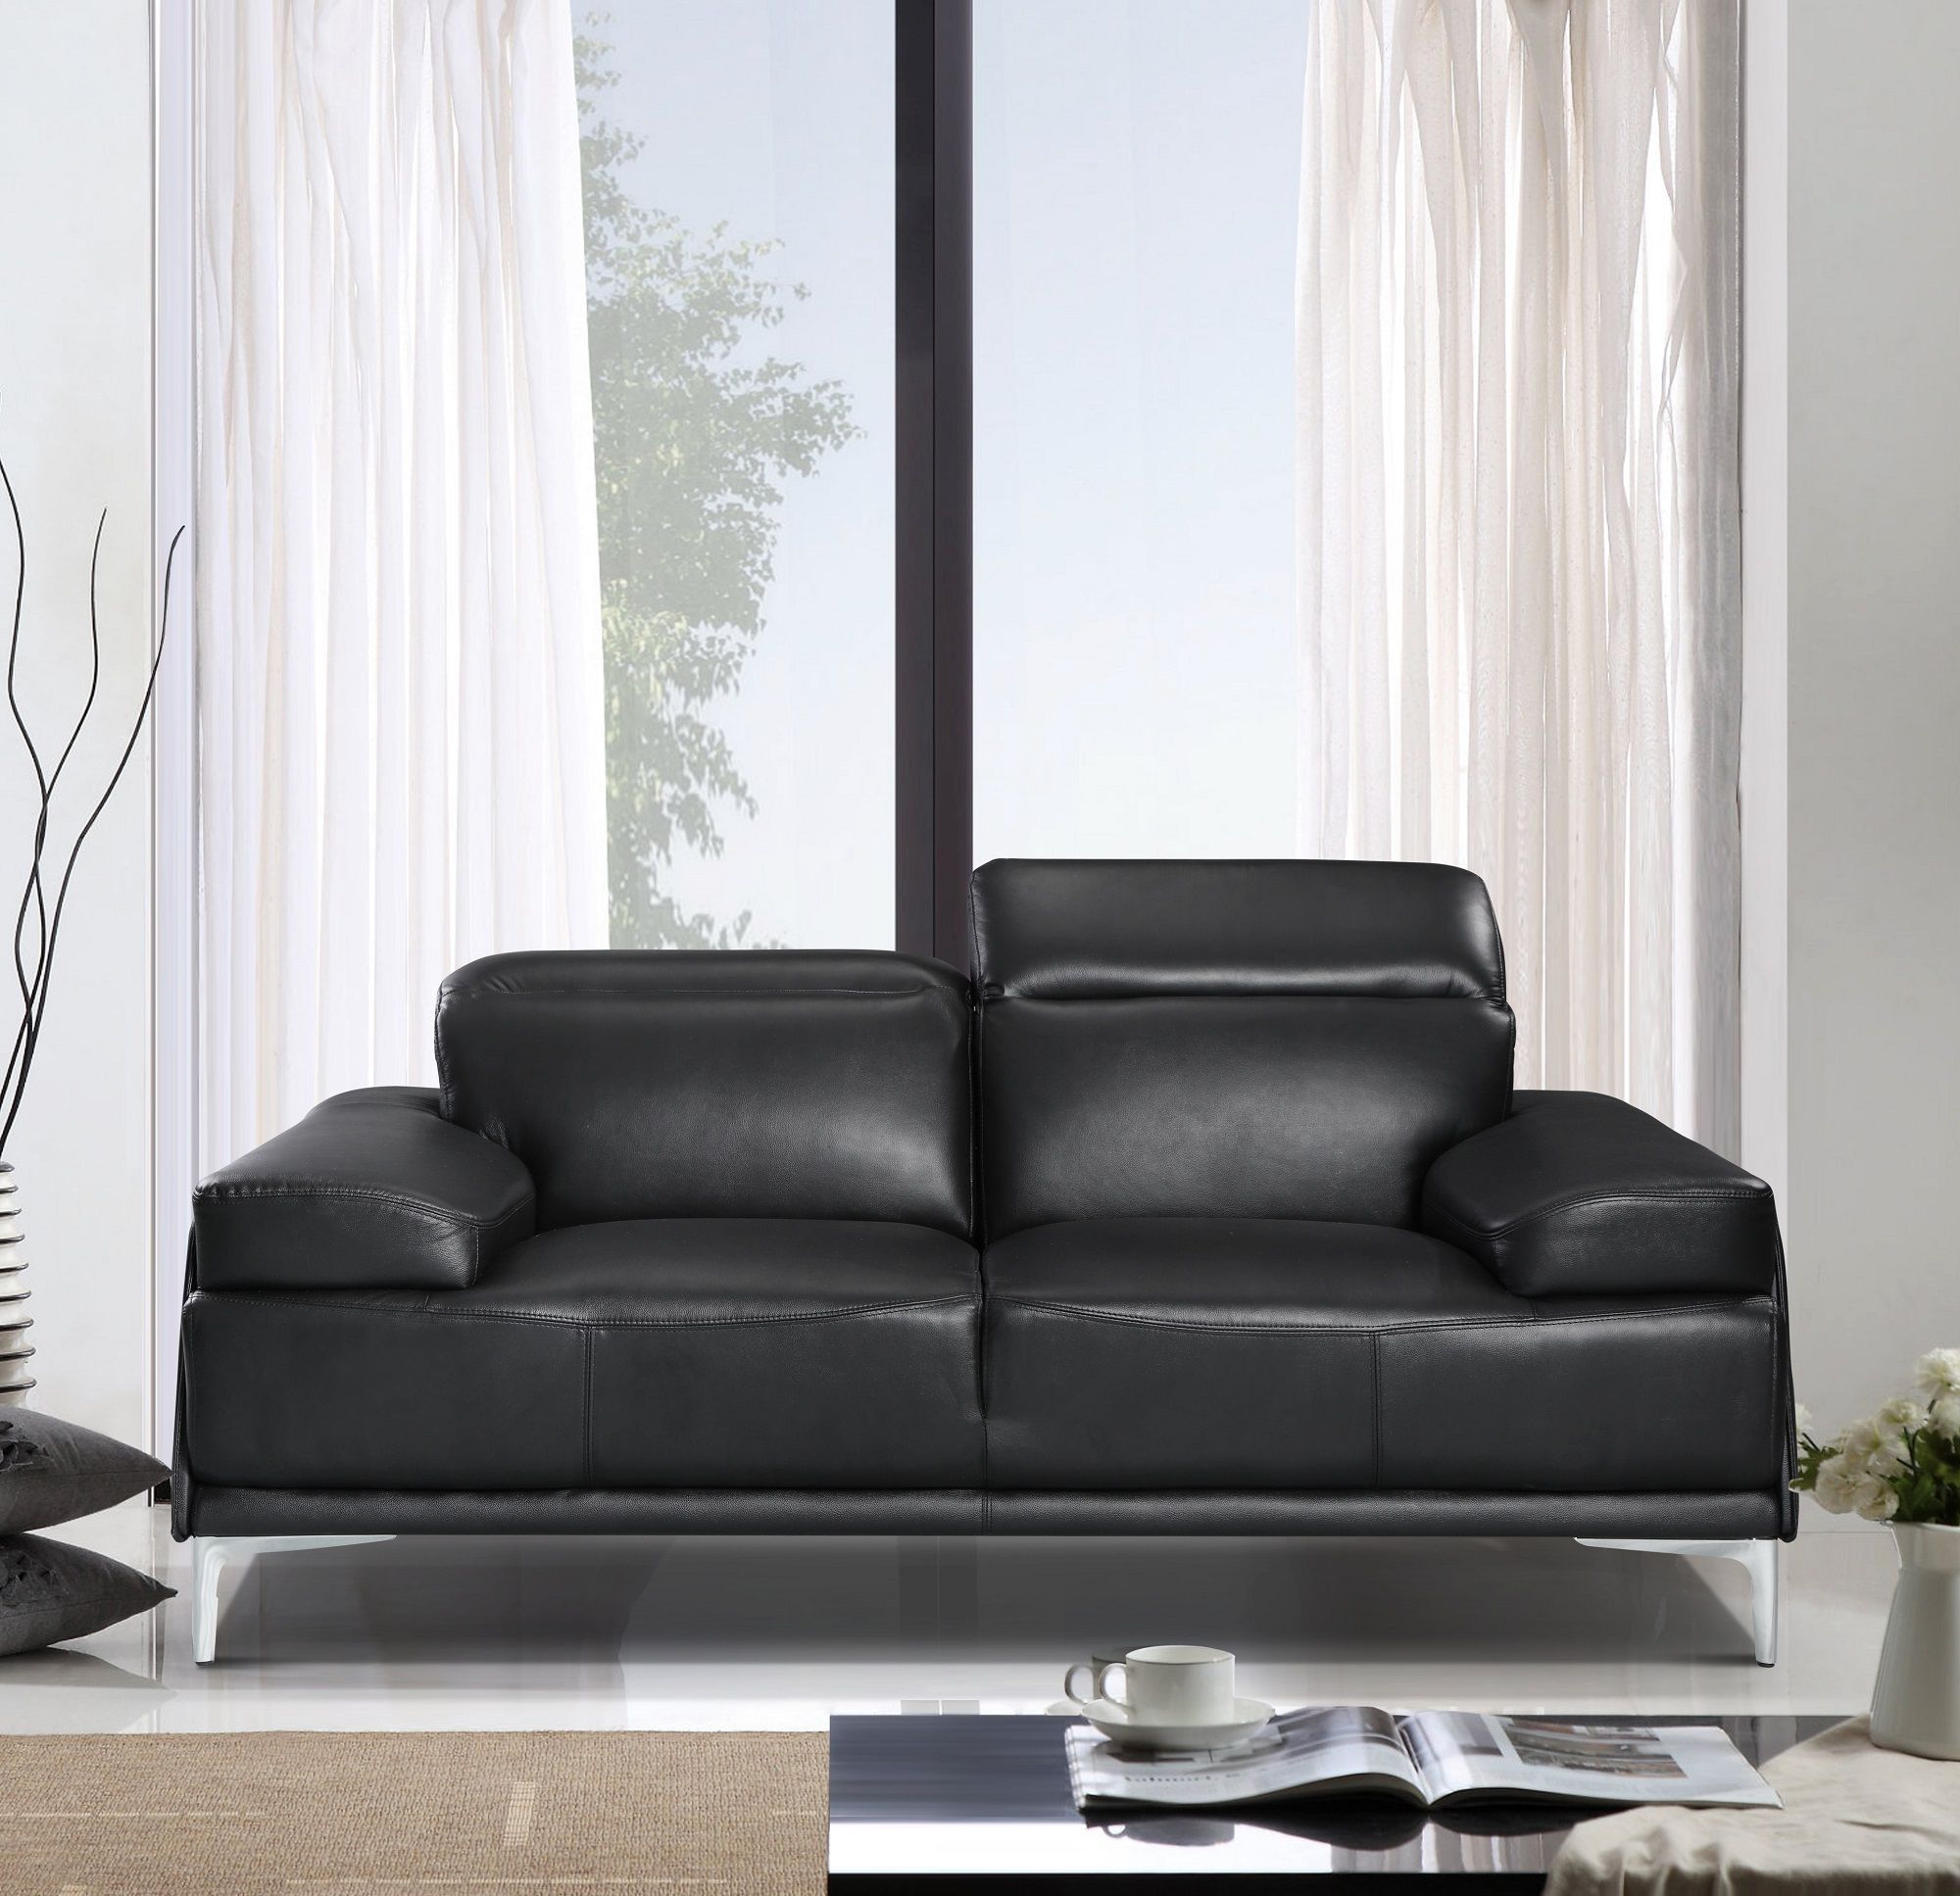 Contemporary Black Leather Living Room Sofa Set Minneapolis Minnesota J Intended For Right Facing Black Sofas (View 6 of 20)